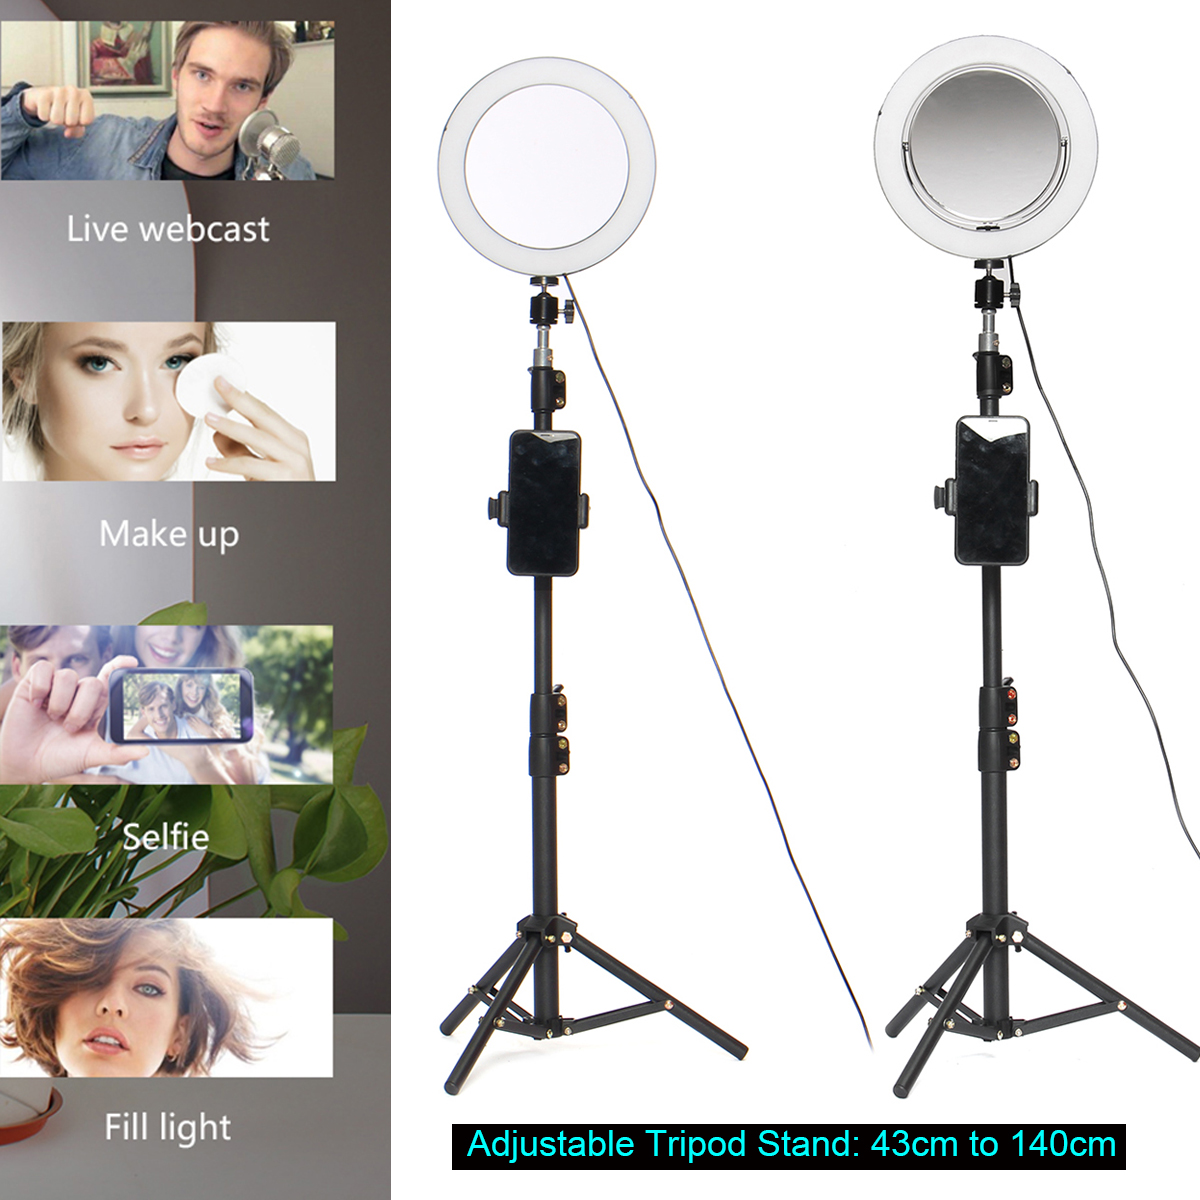 866quot-Live-Stream-Makeup-Mirror-Selfie-LED-Ring-Light-Fill-in-Light-With-Remote-Control-Cell-Phone-1635844-3